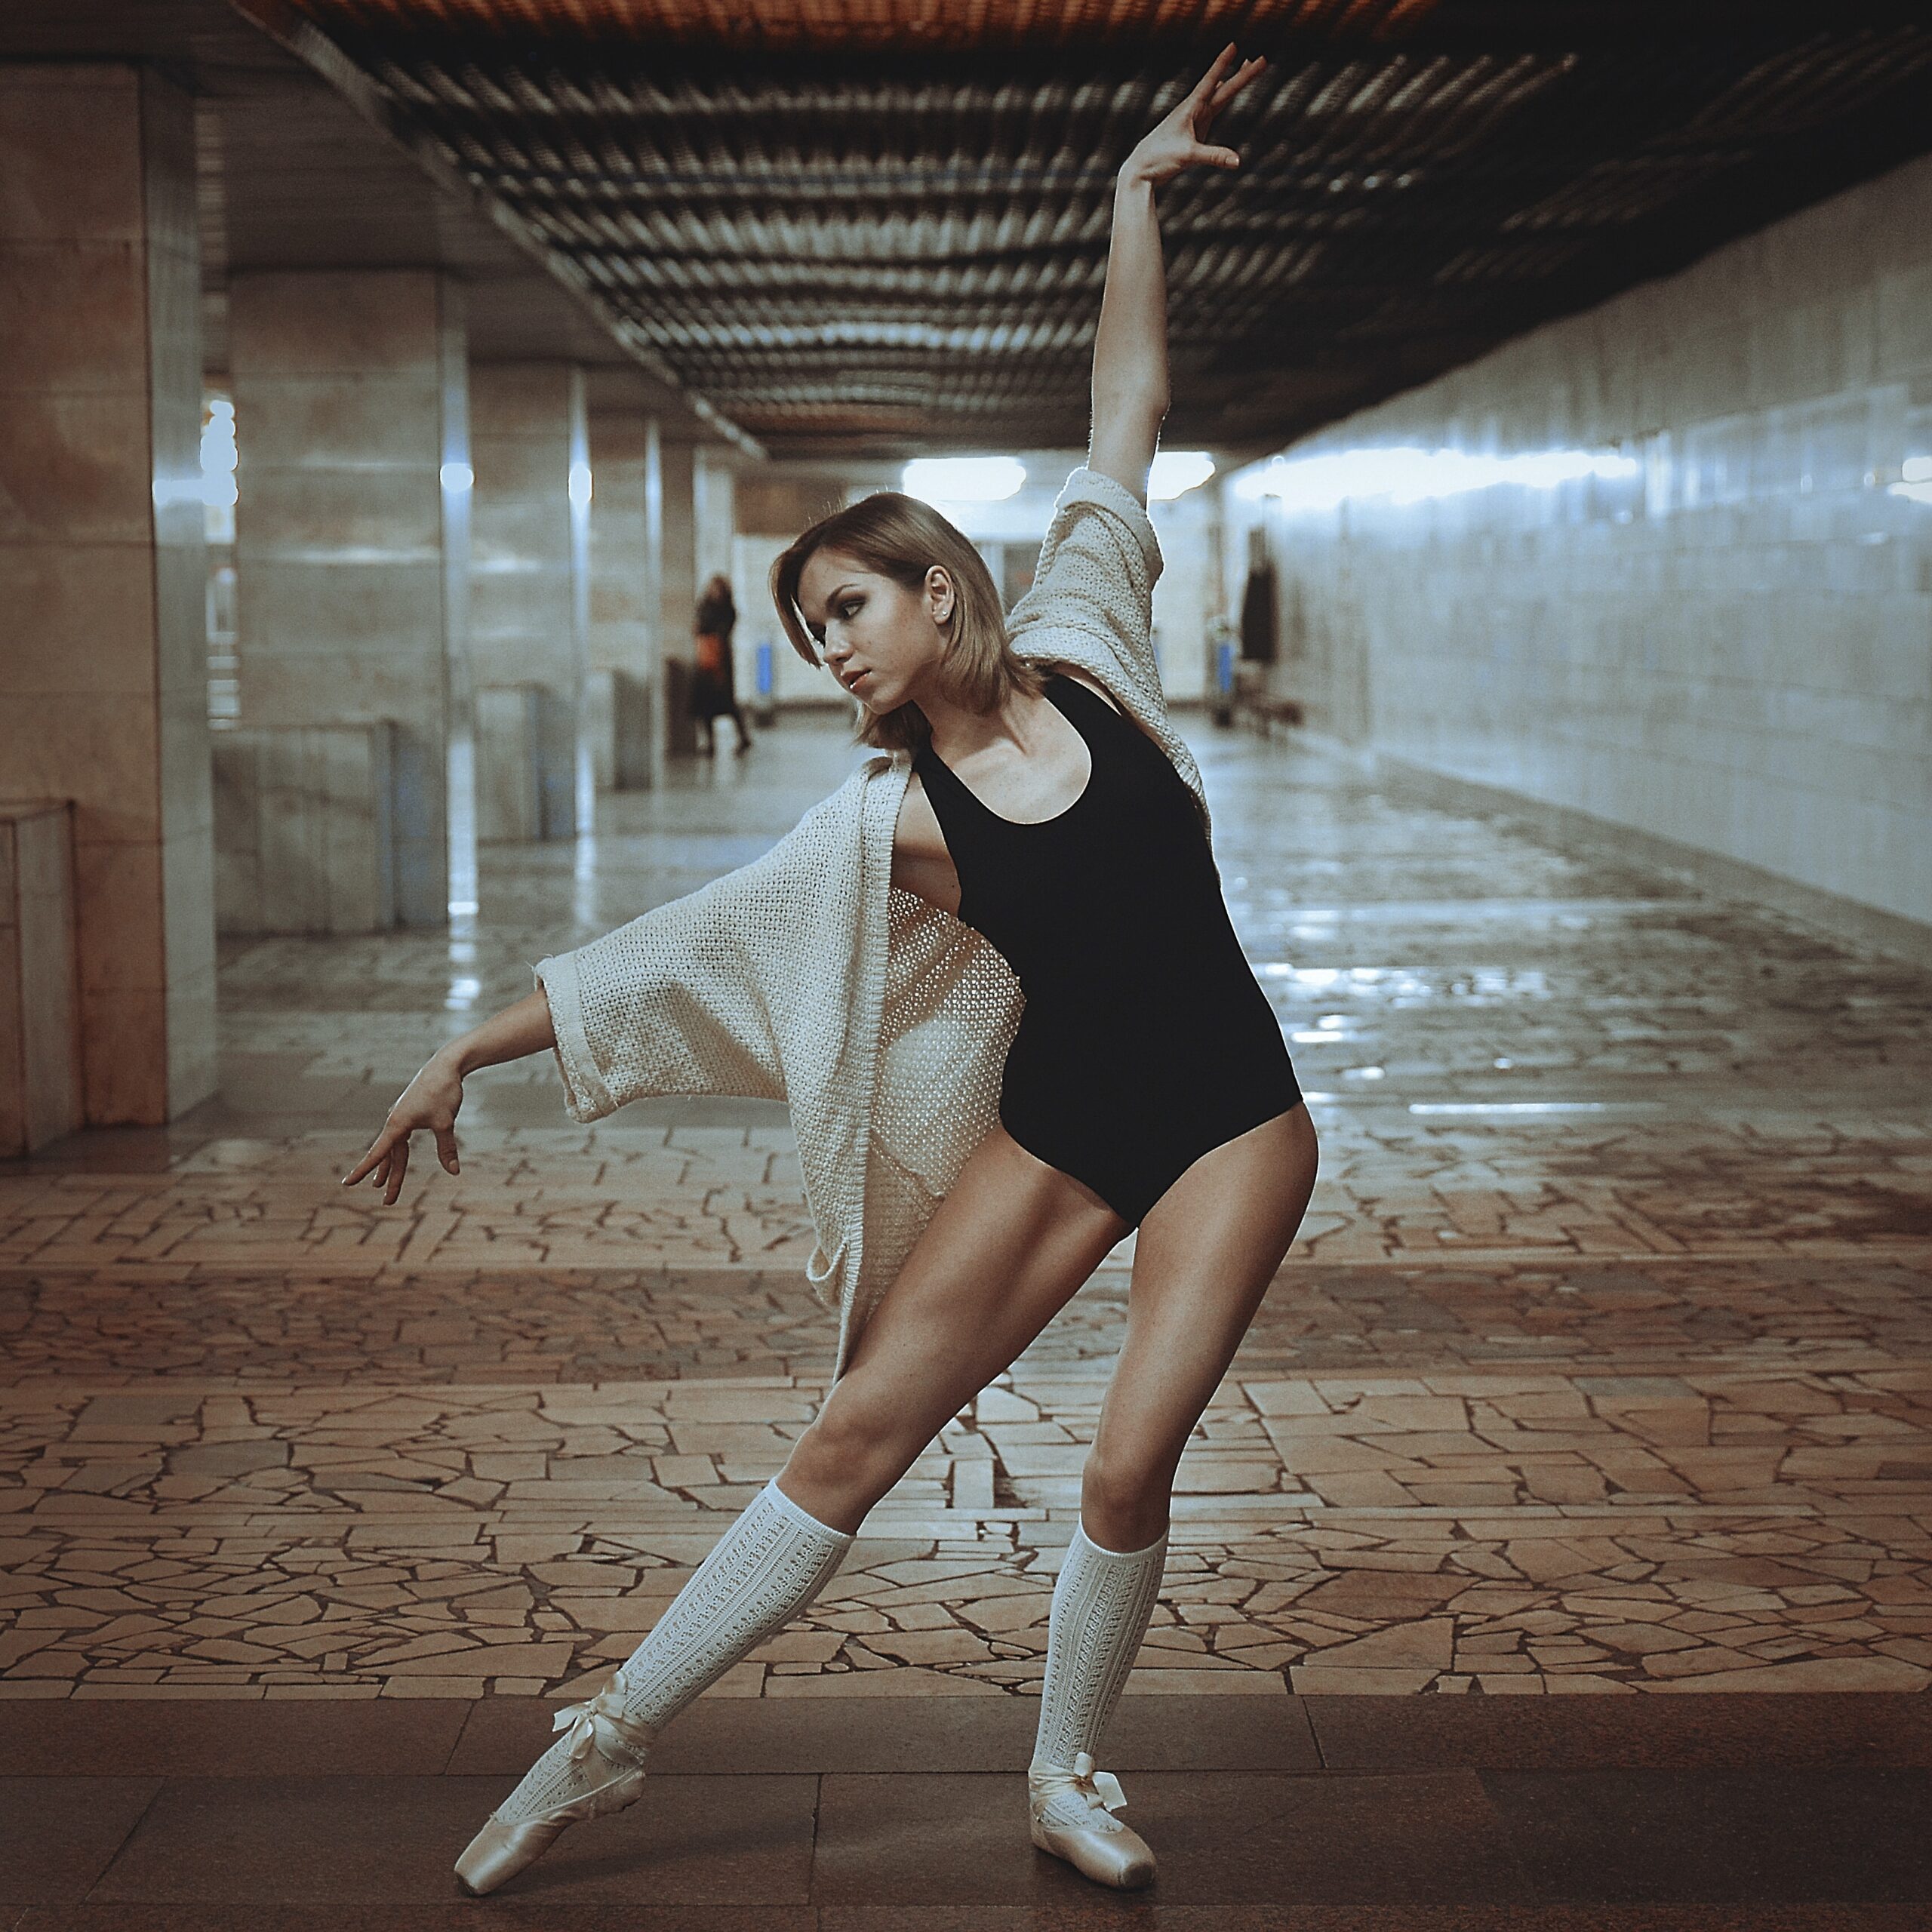 You are currently viewing Balletcore: The Newest Dance-Inspired Trend Taking Over Fashion